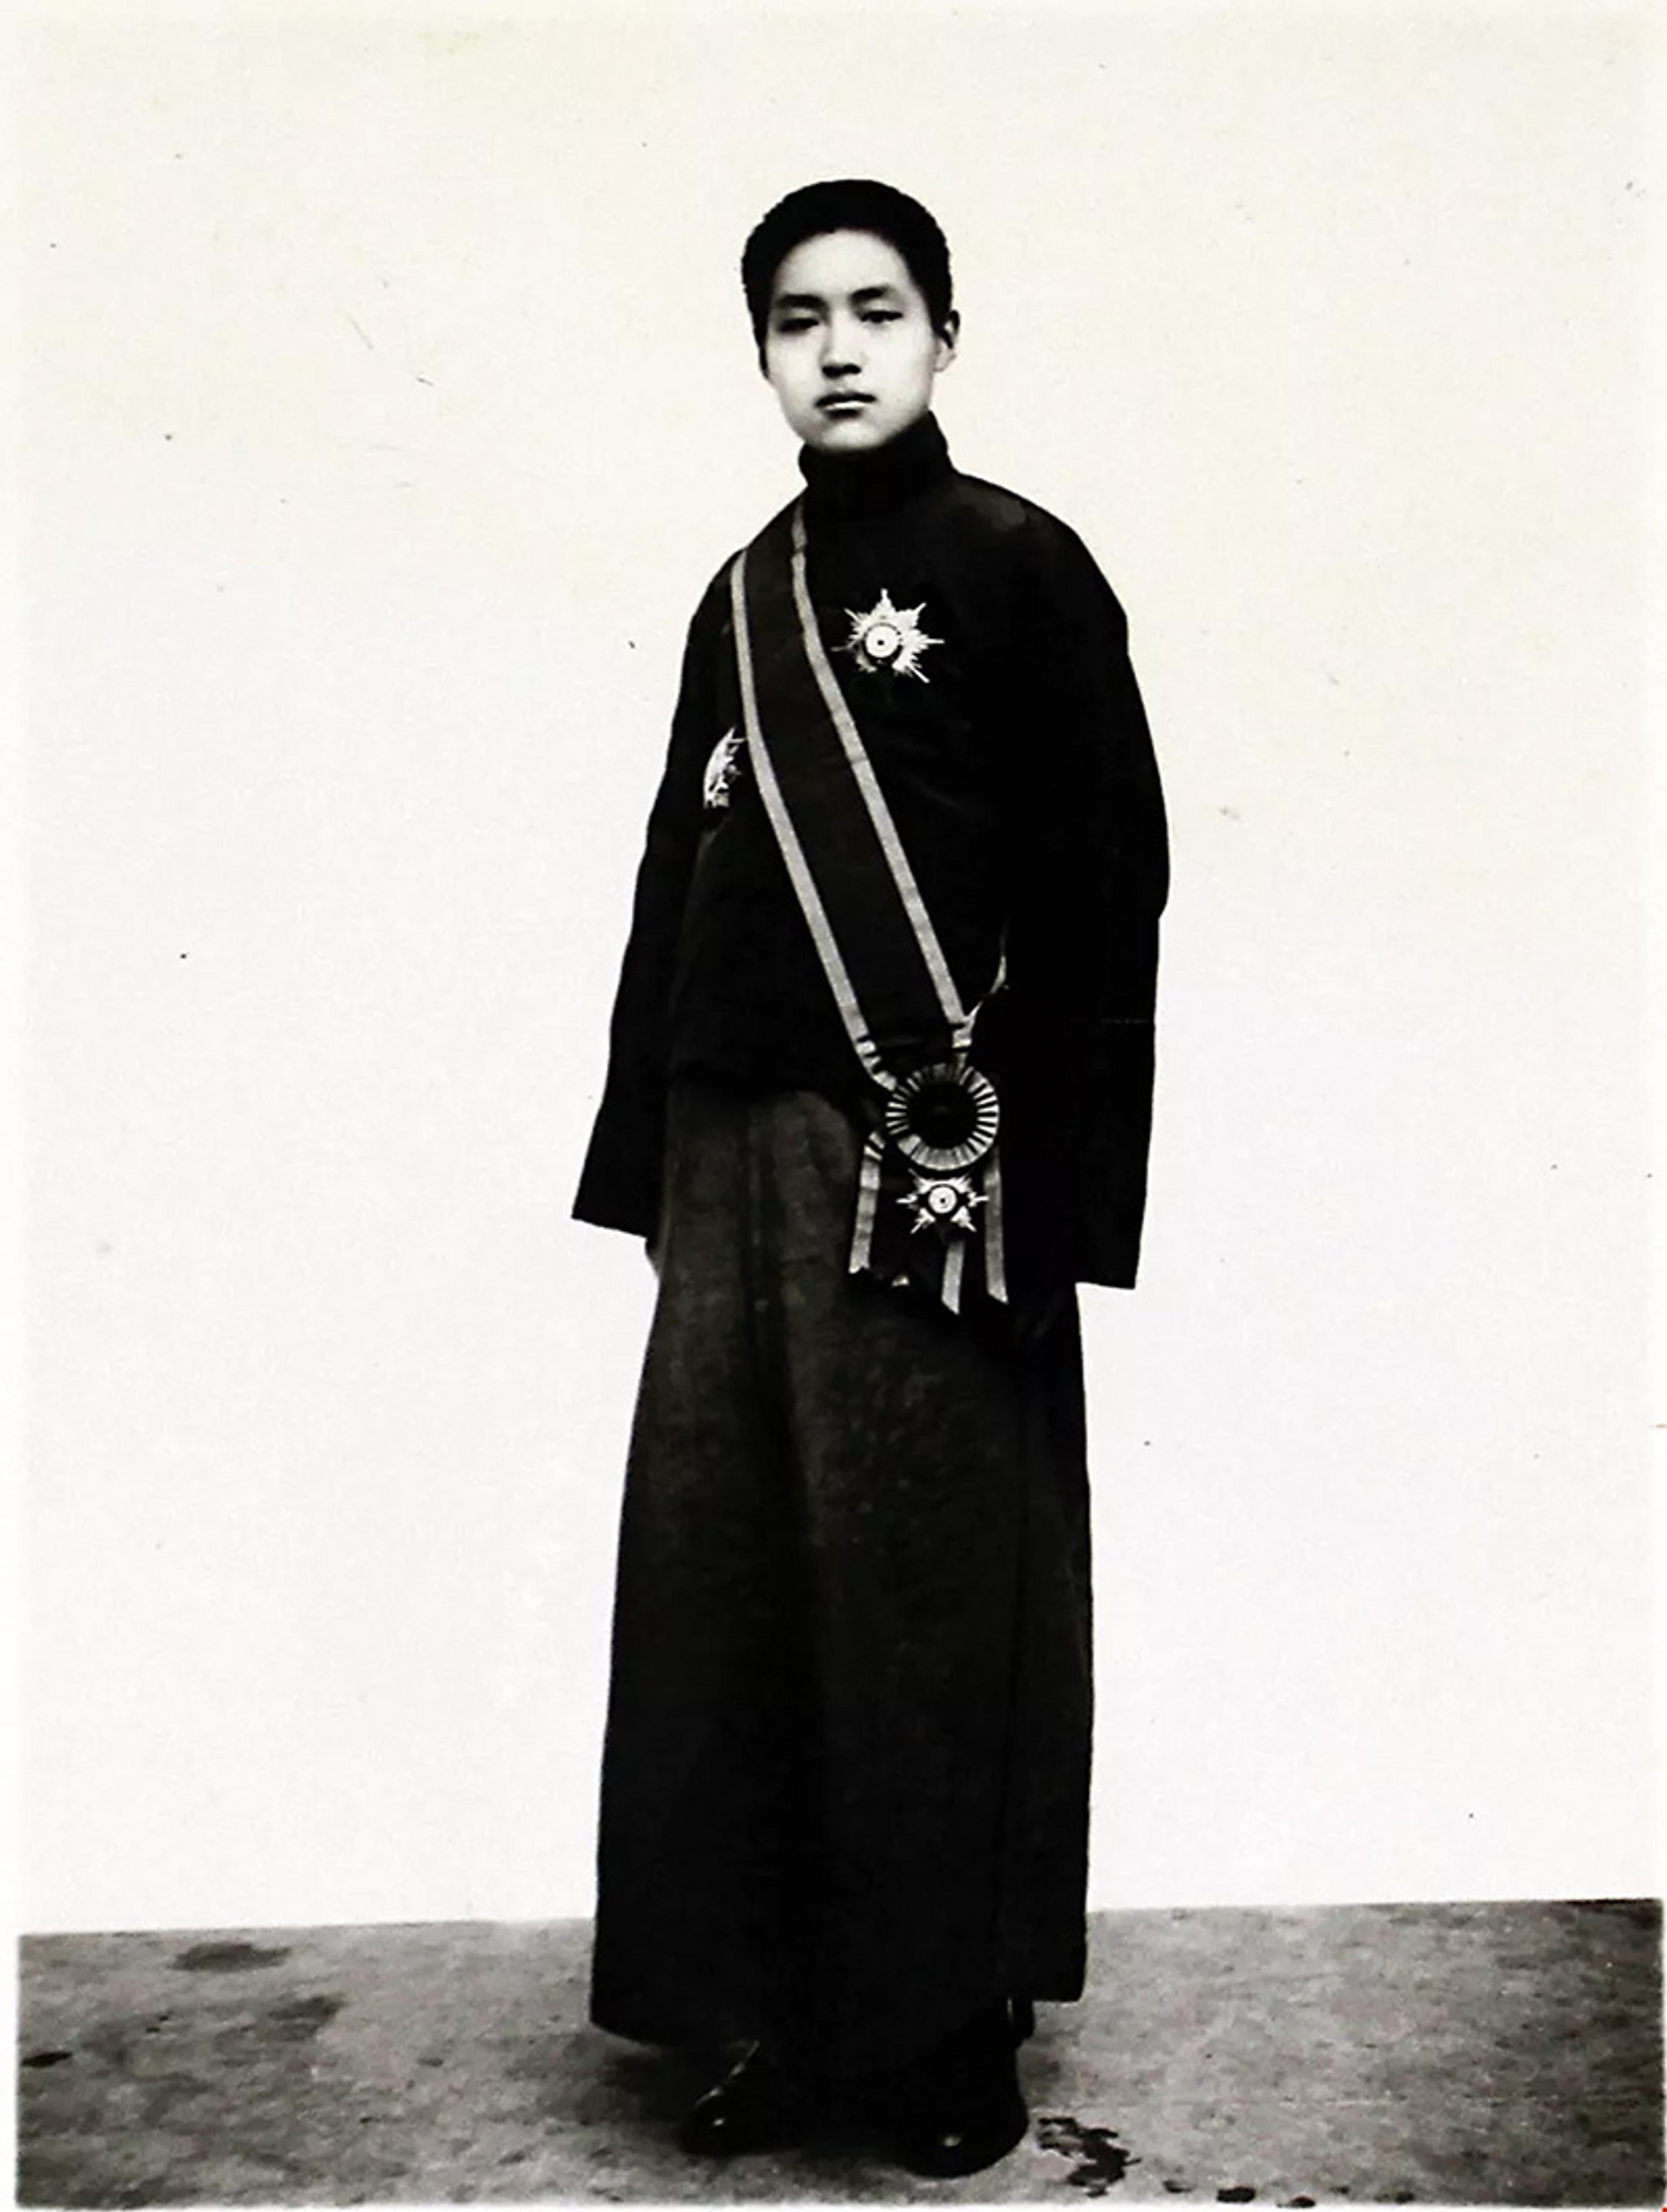 A young person standing in traditional attire, featuring a long robe and decorations including a sash and medals. The background is plain and light in colour, focusing attention entirely on the subject in the centre of the image.